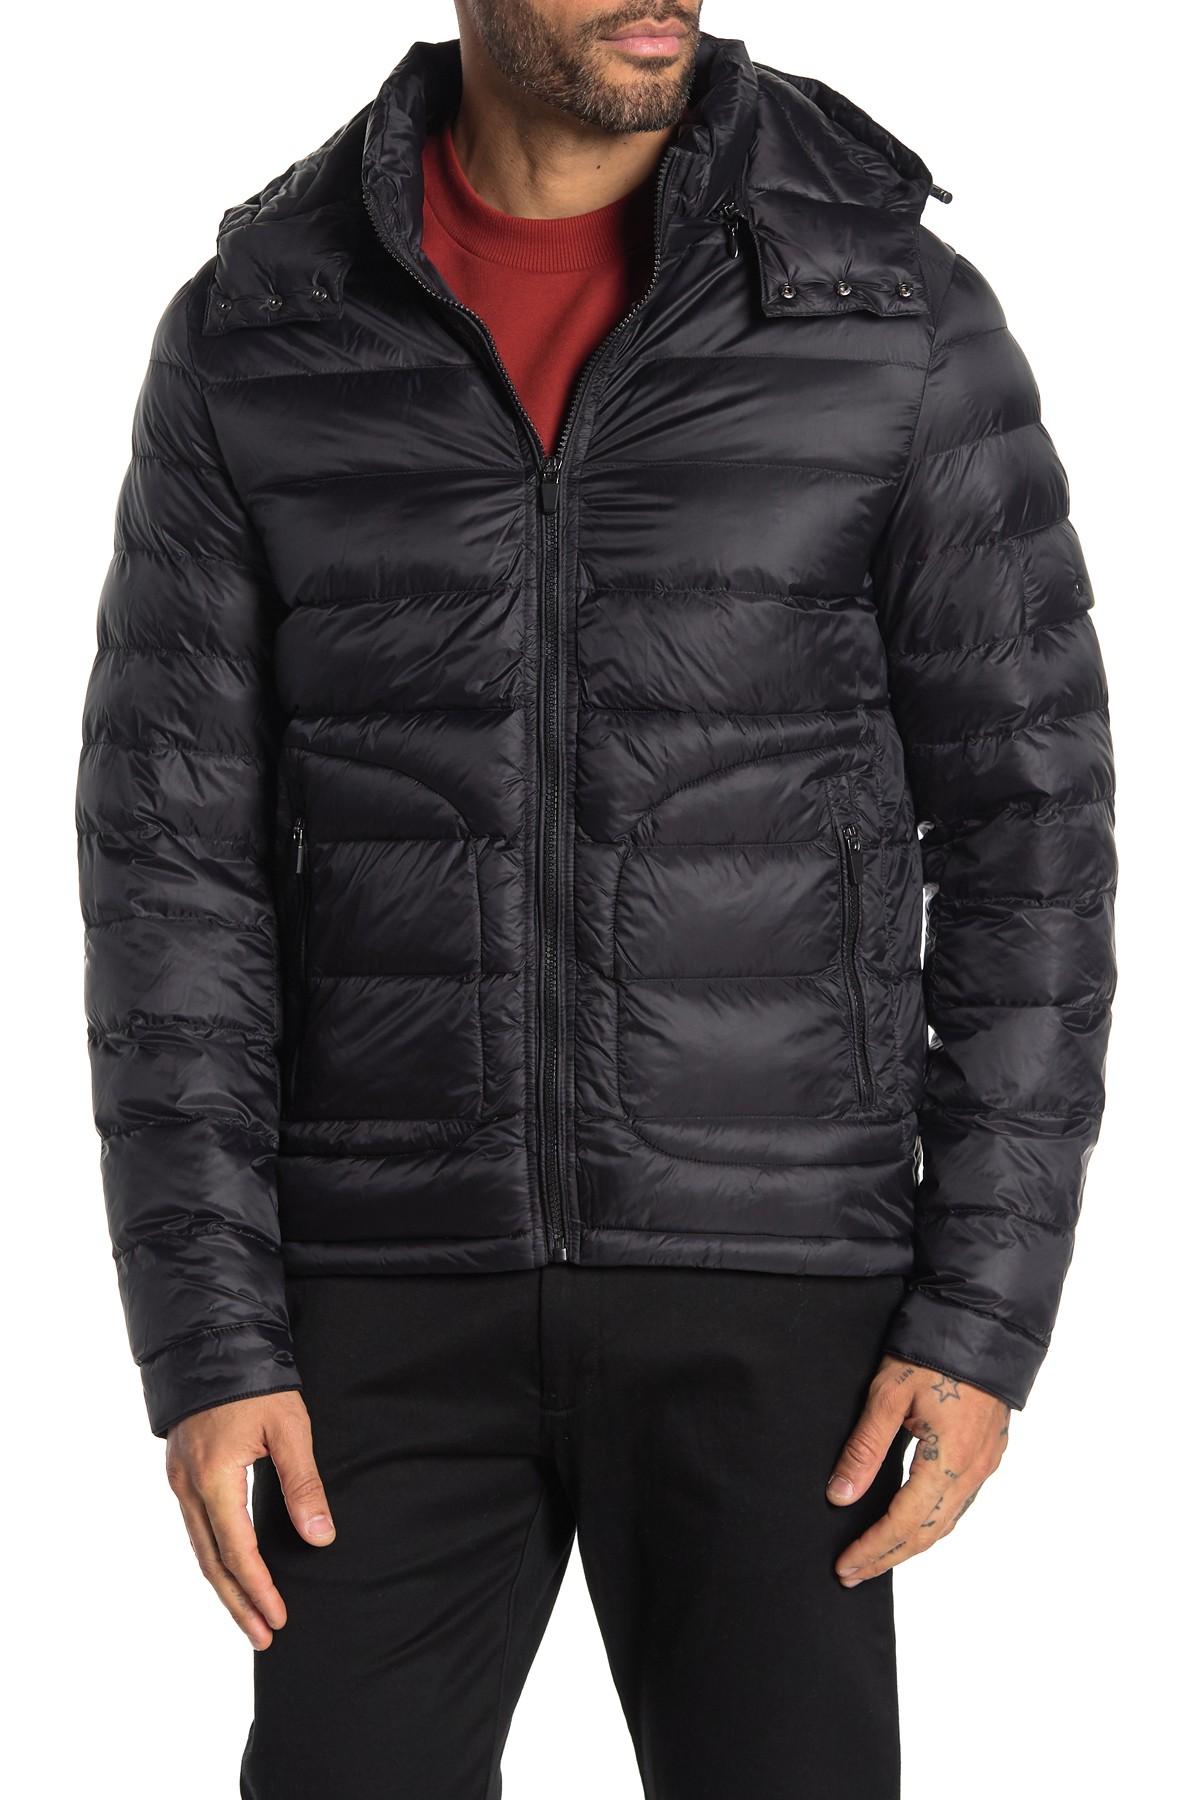 Slate & Stone Synthetic Hooded Puffer Down Jacket in Black for Men - Lyst